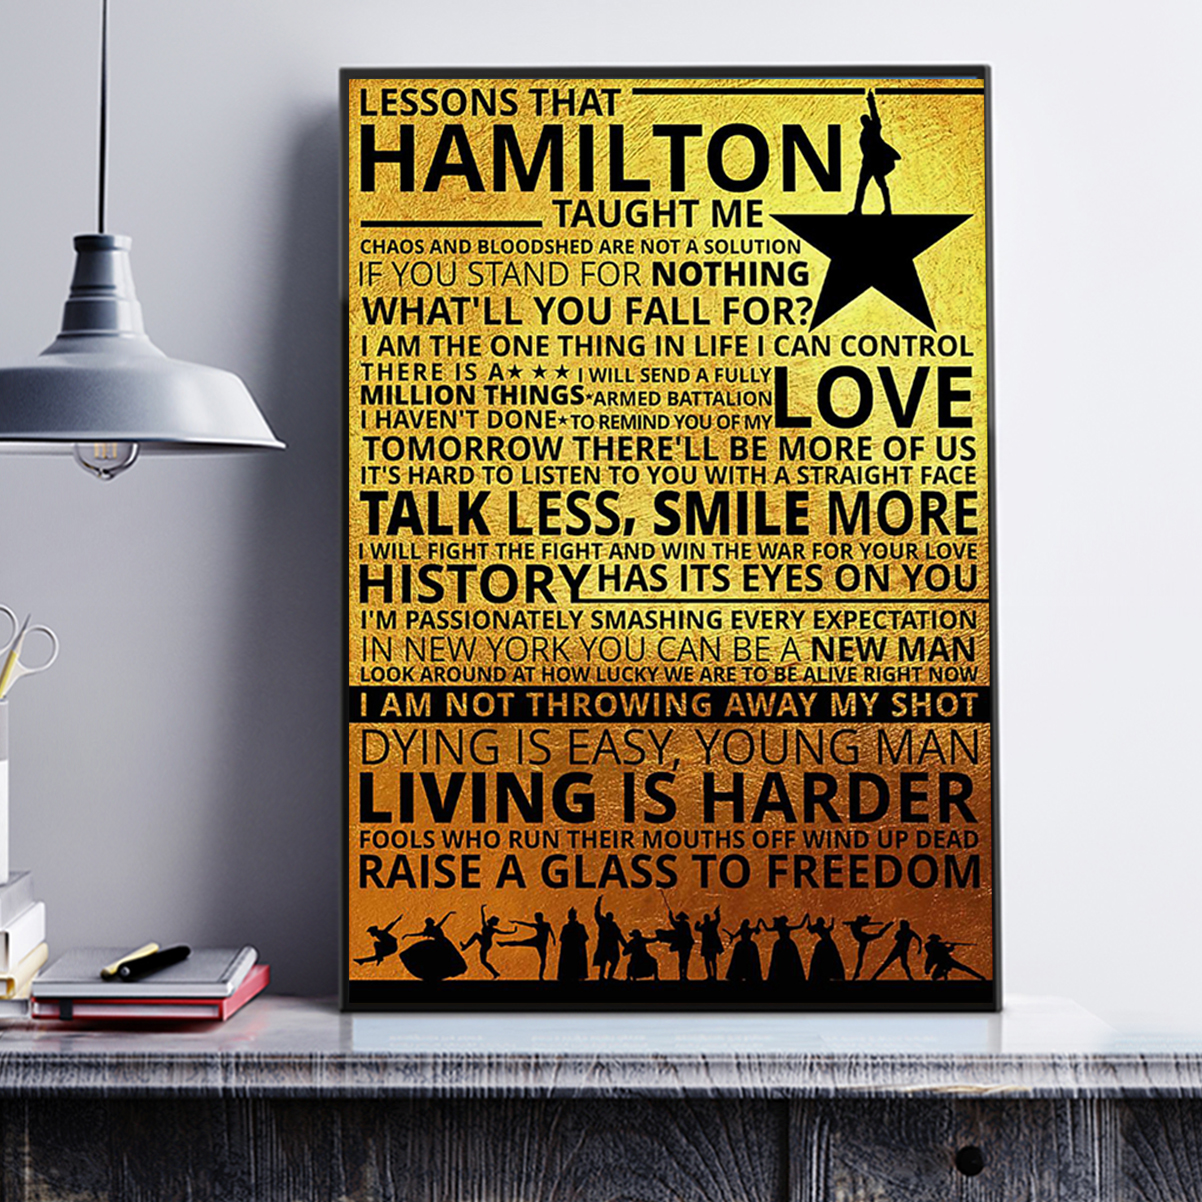 Lessons hamilton taught me poster A2